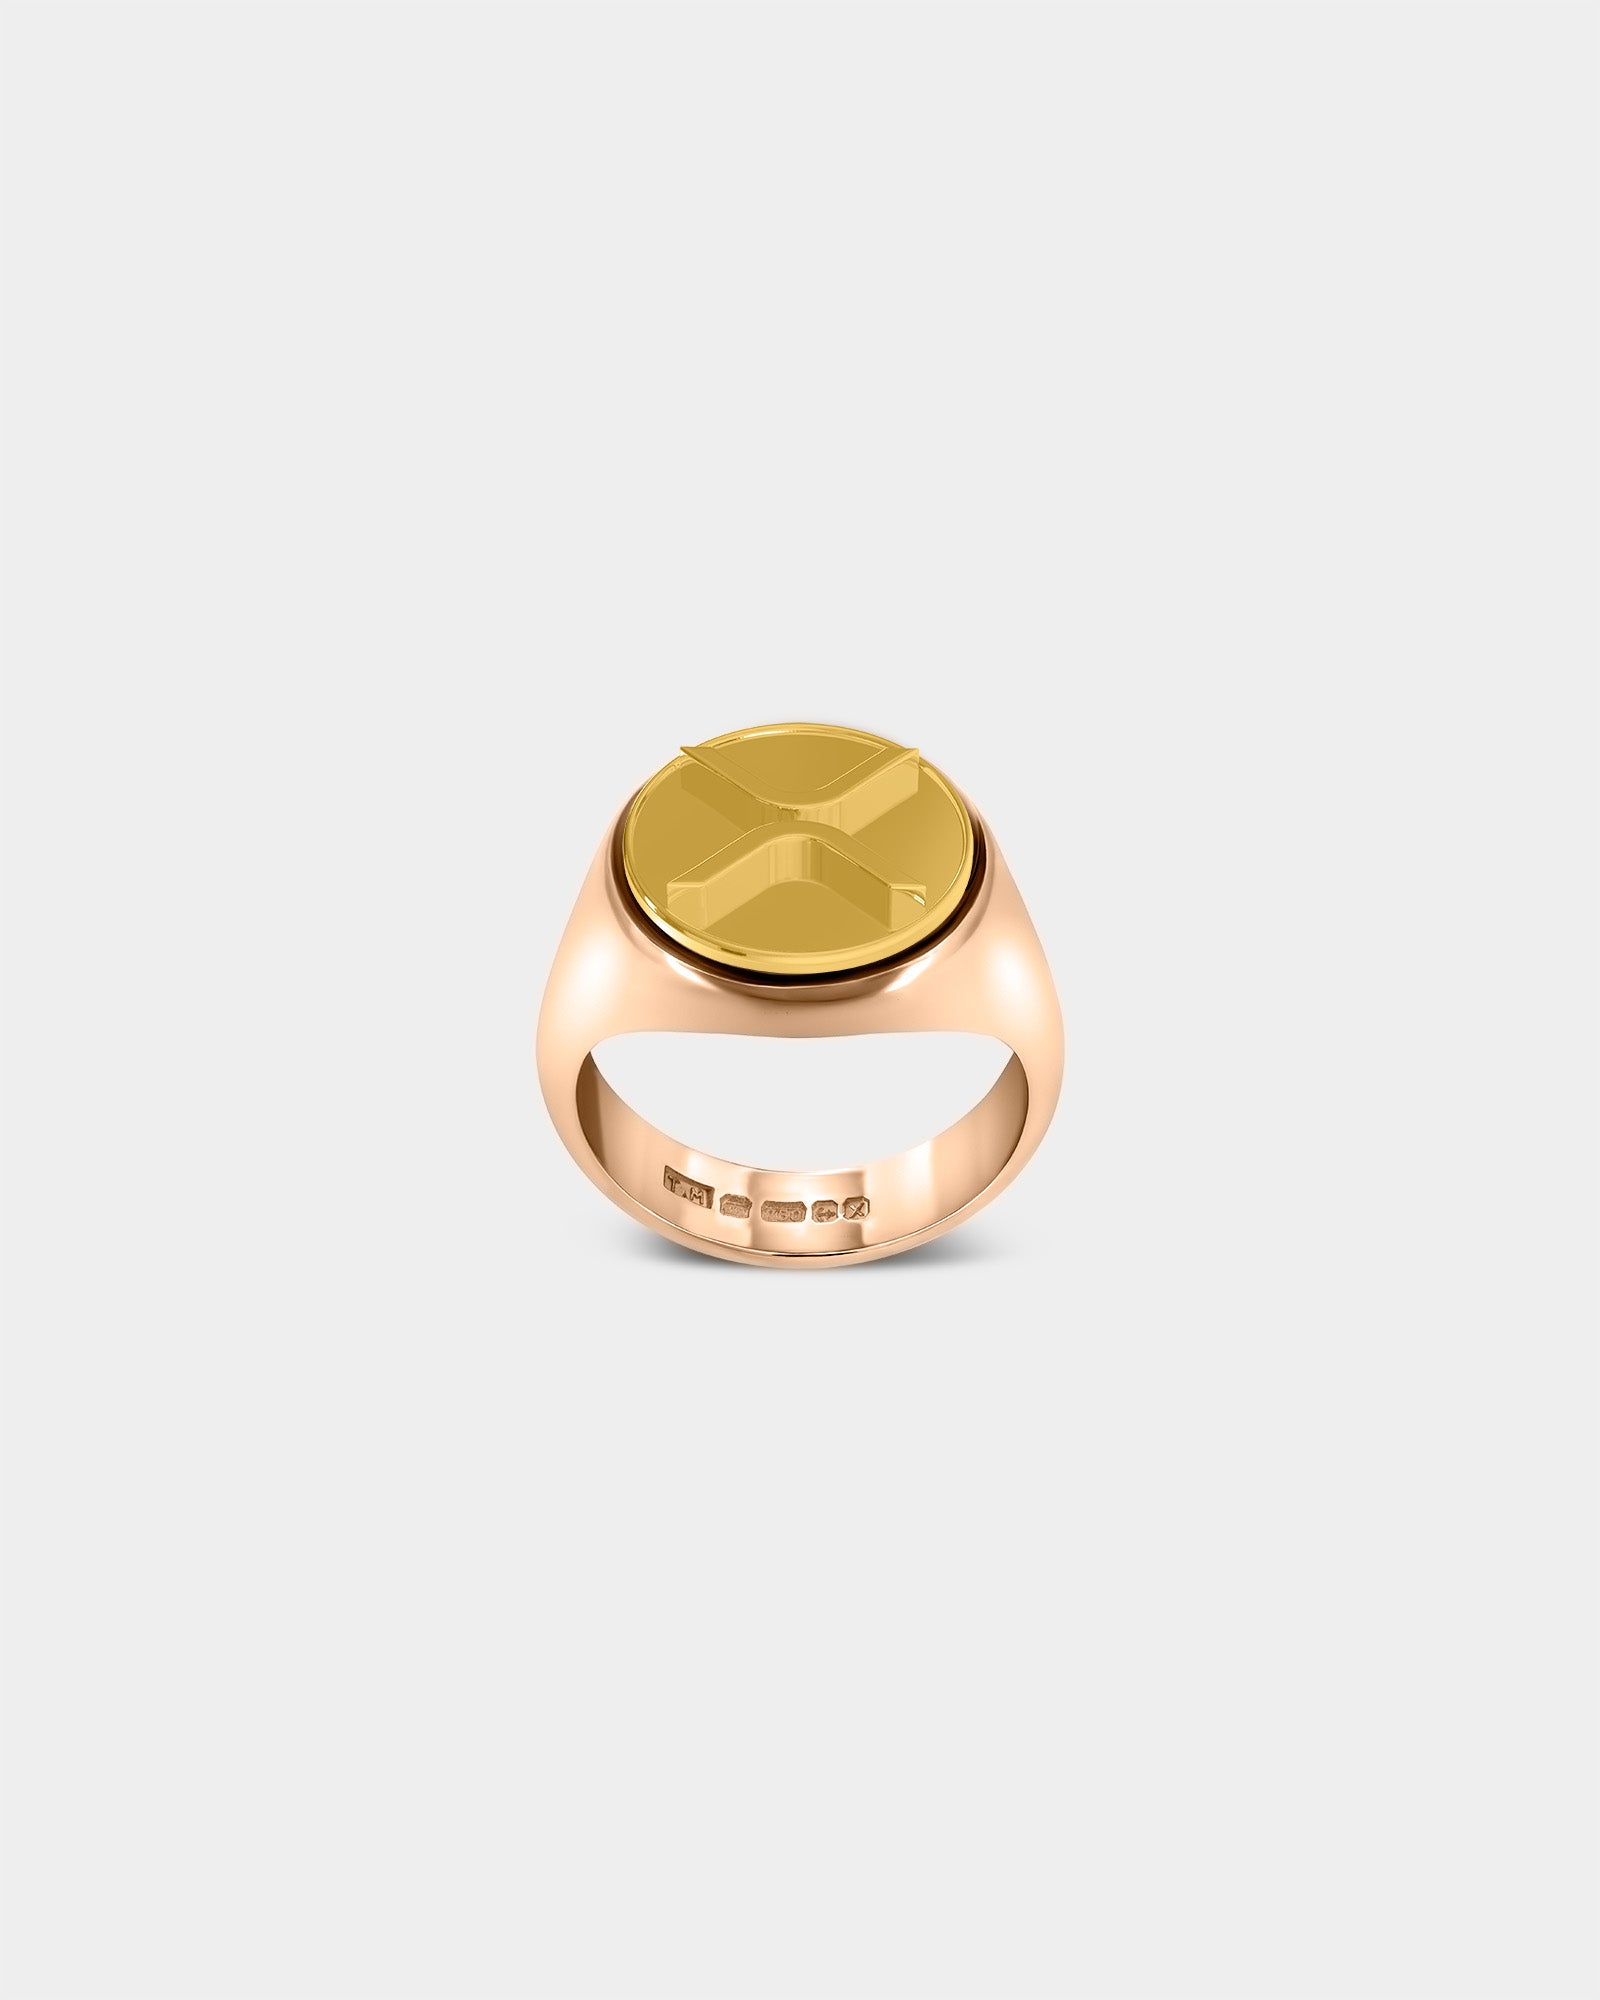 Large Ripple XRP Crypto Ring in 9k Rose Gold / 9k Yellow Gold by Wilson Grant